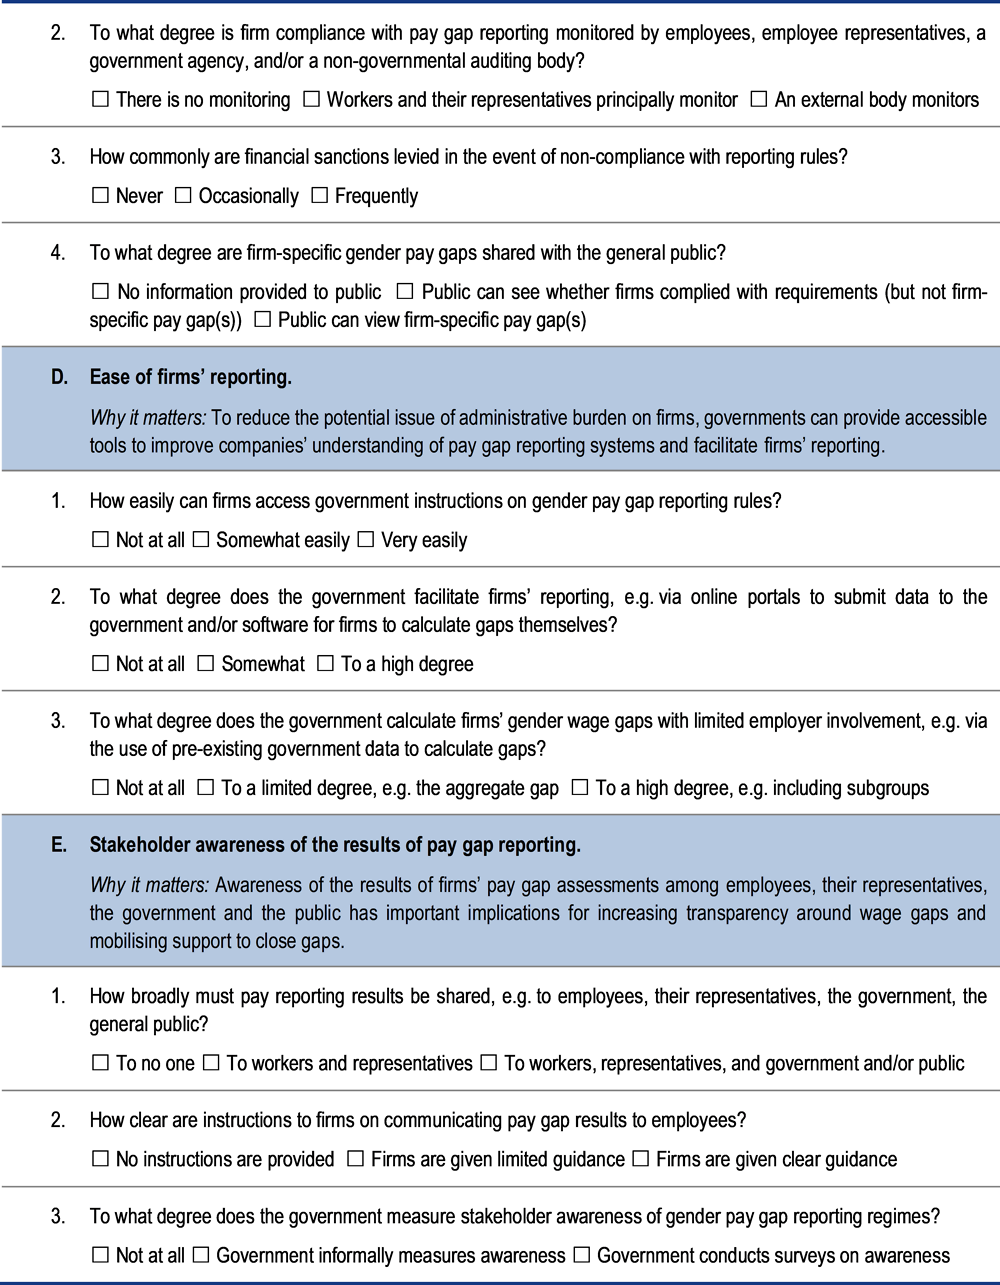 Figure 1.6. Policy checklist for gender pay gap reporting systems